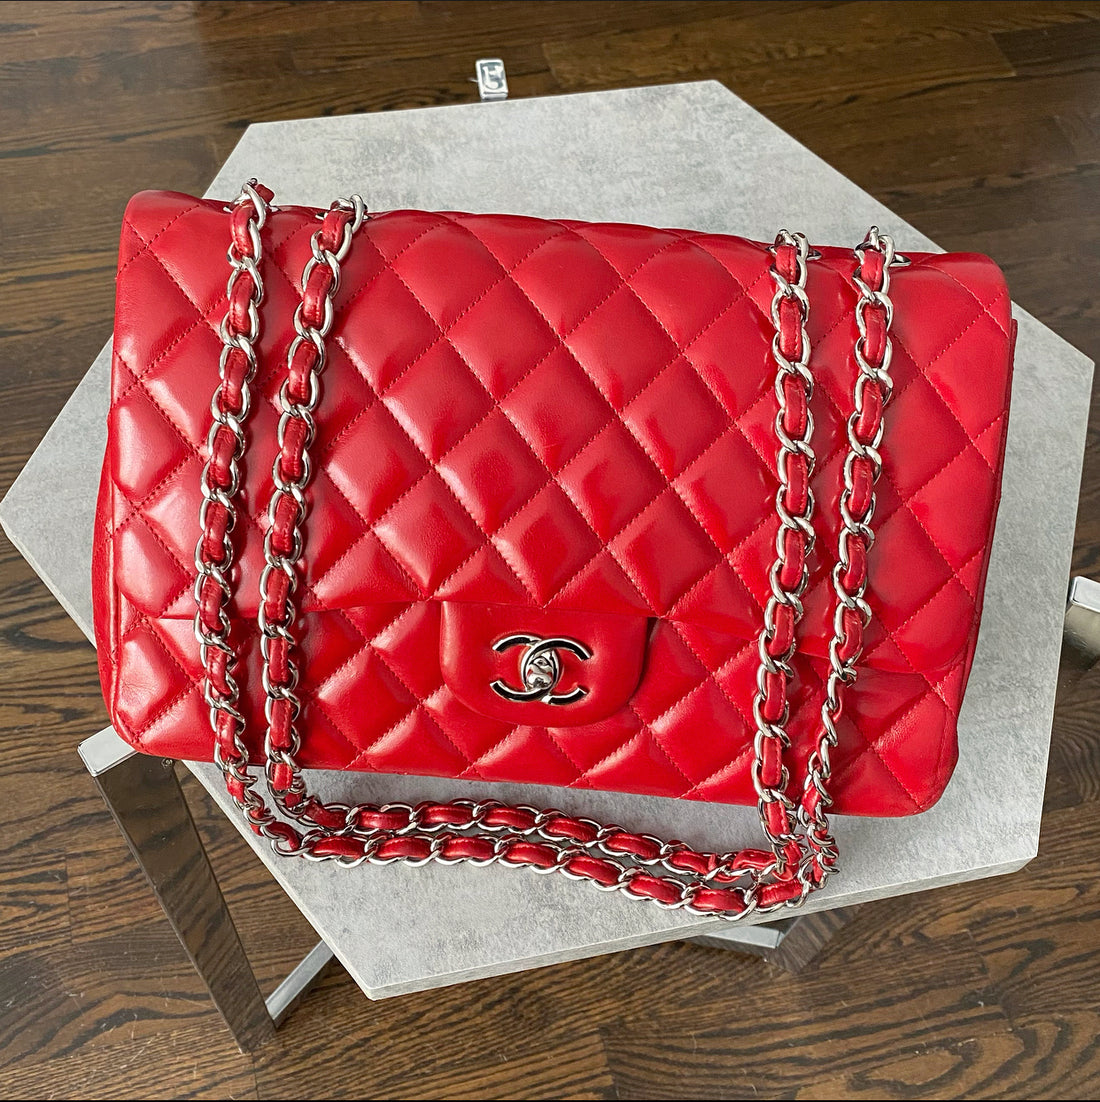 Chanel Red Vintage Quilted Lambskin Single Flap Bag at Jill's Consignment